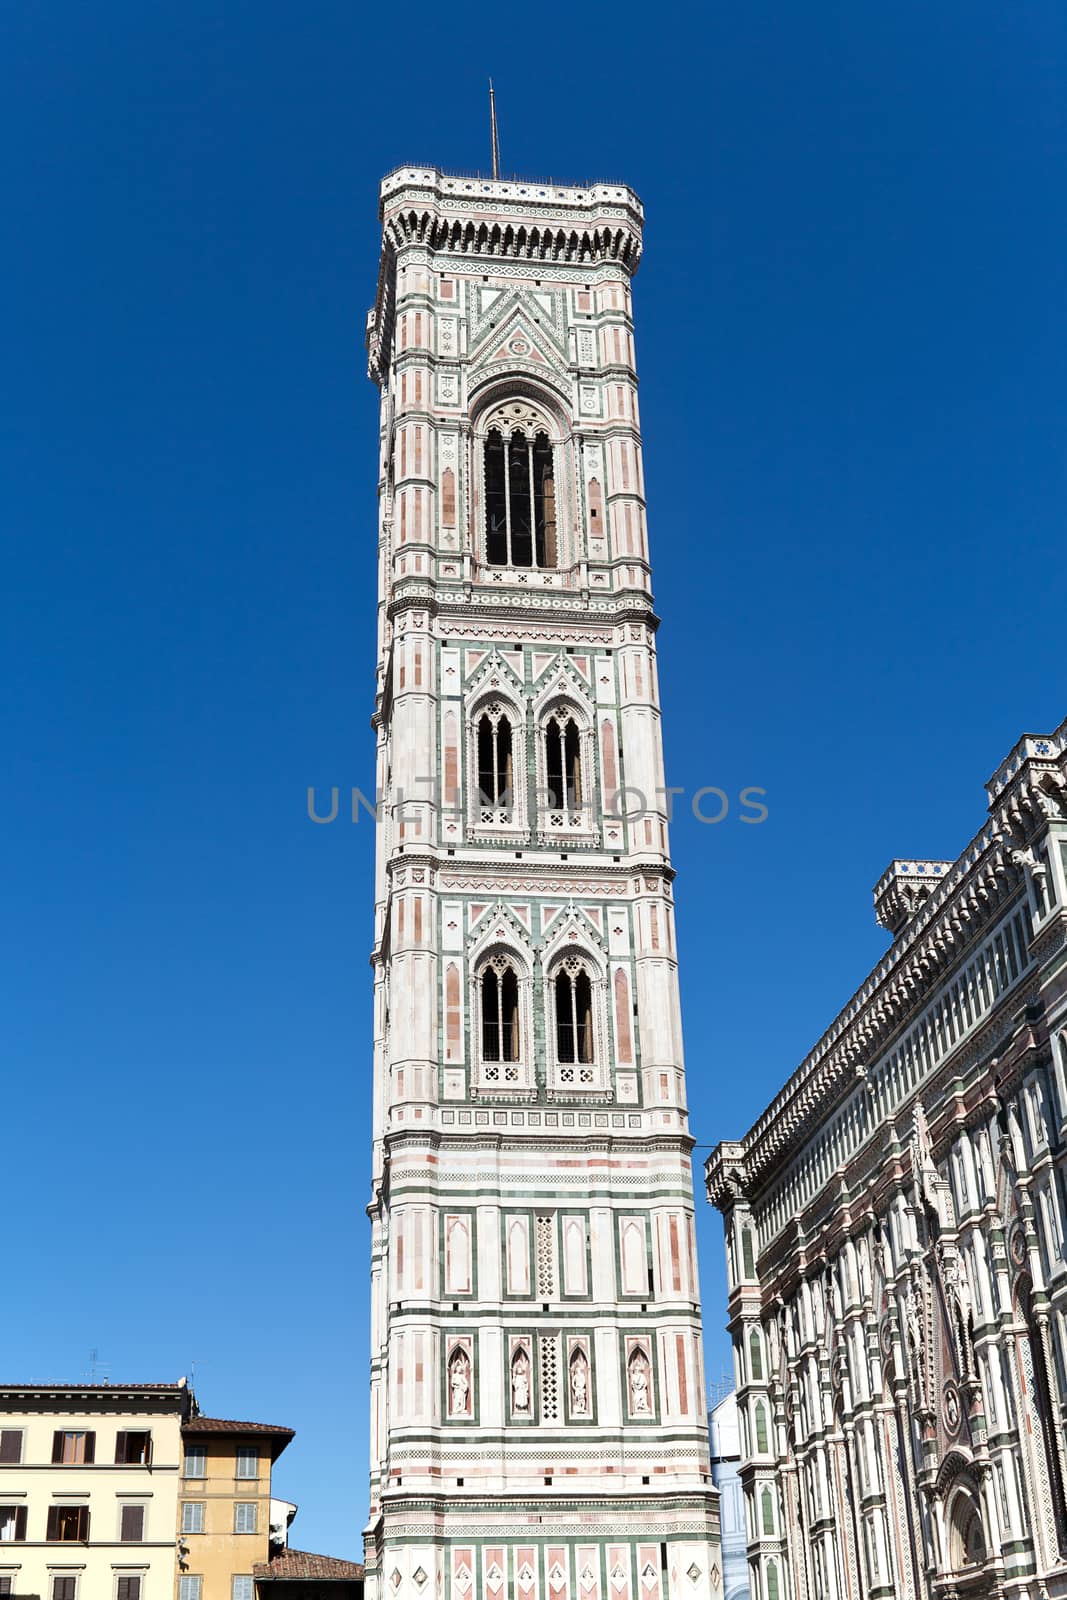  Bell Tower on Piazza del Duomo in Florence in Italy by mychadre77